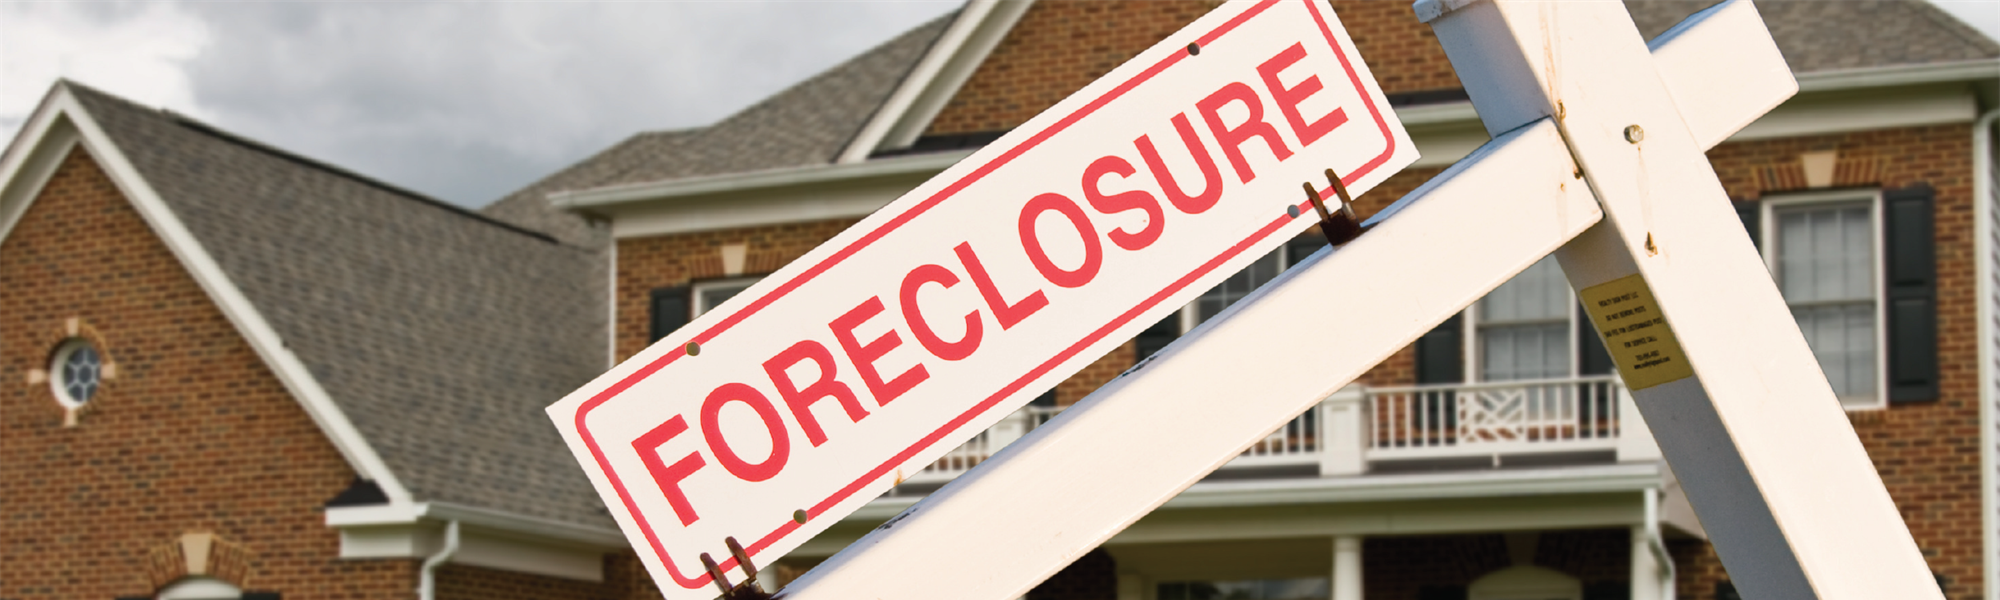 Short Sales & Foreclosures: What Real Estate Professionals Need to Know